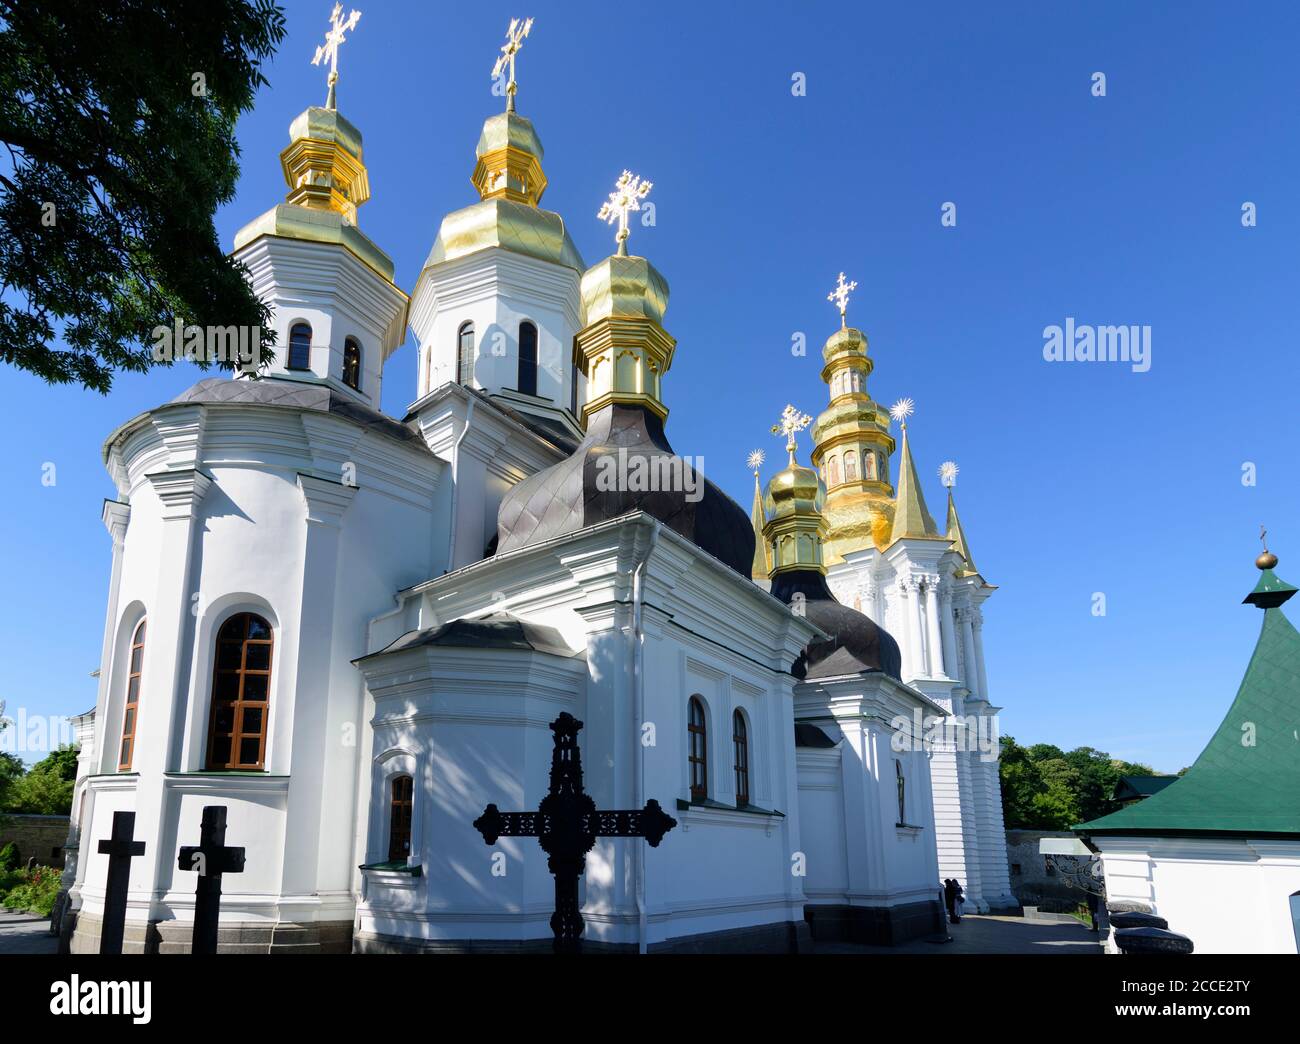 Kiev (Kyiv), Nativity of the blessed virgin Mary Church at Lower Lavra, Pechersk Lavra (Monastery of the Caves), historic Orthodox Christian monastery Stock Photo